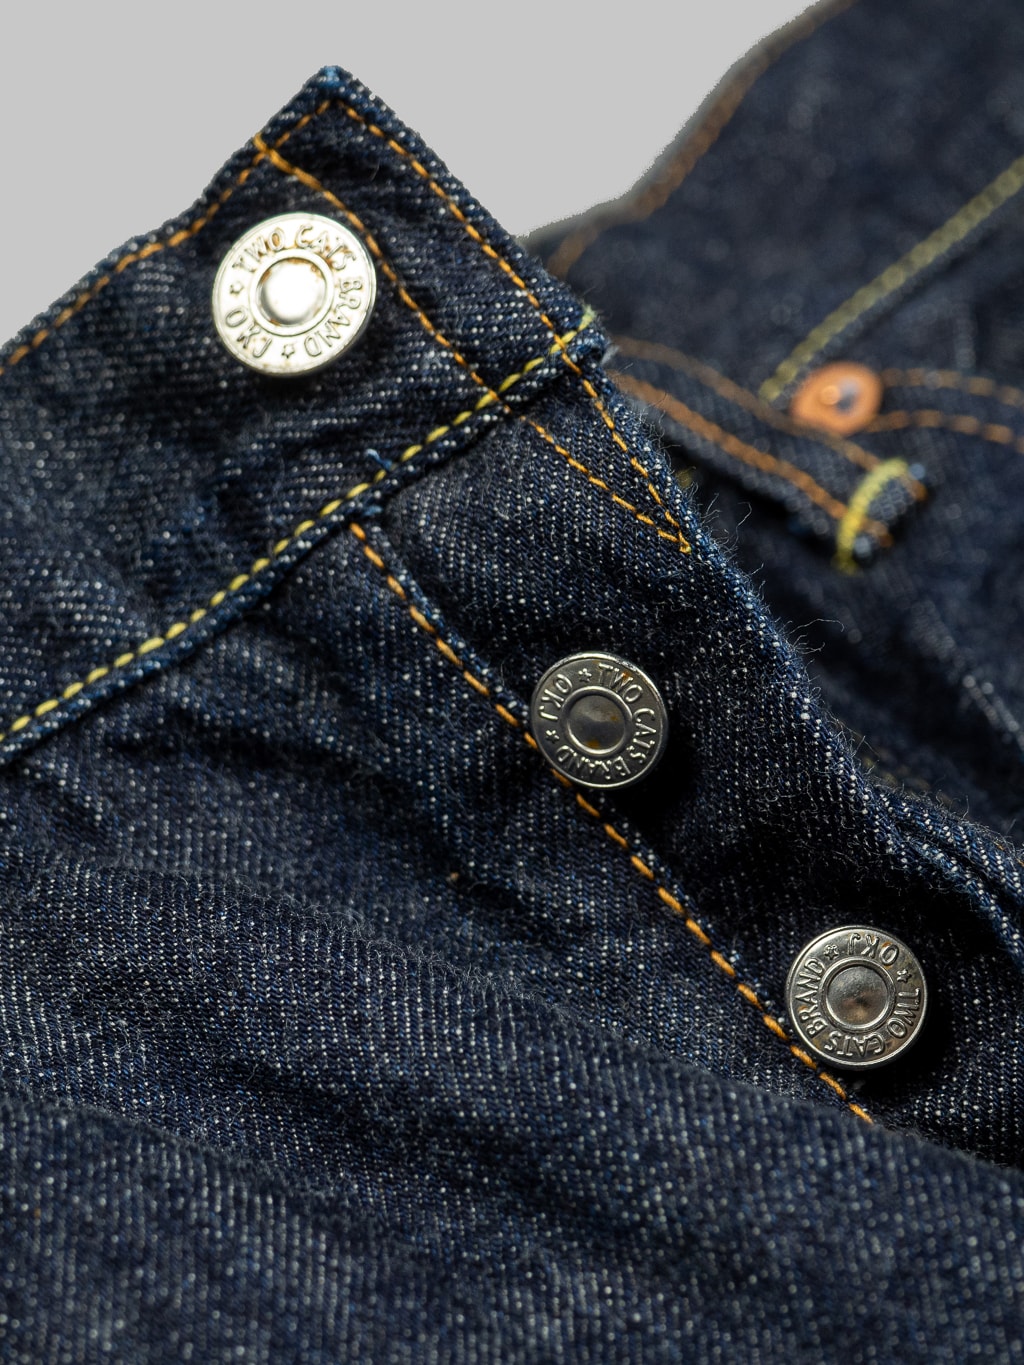 TCB 50s Slim R Jeans customized buttons closeup